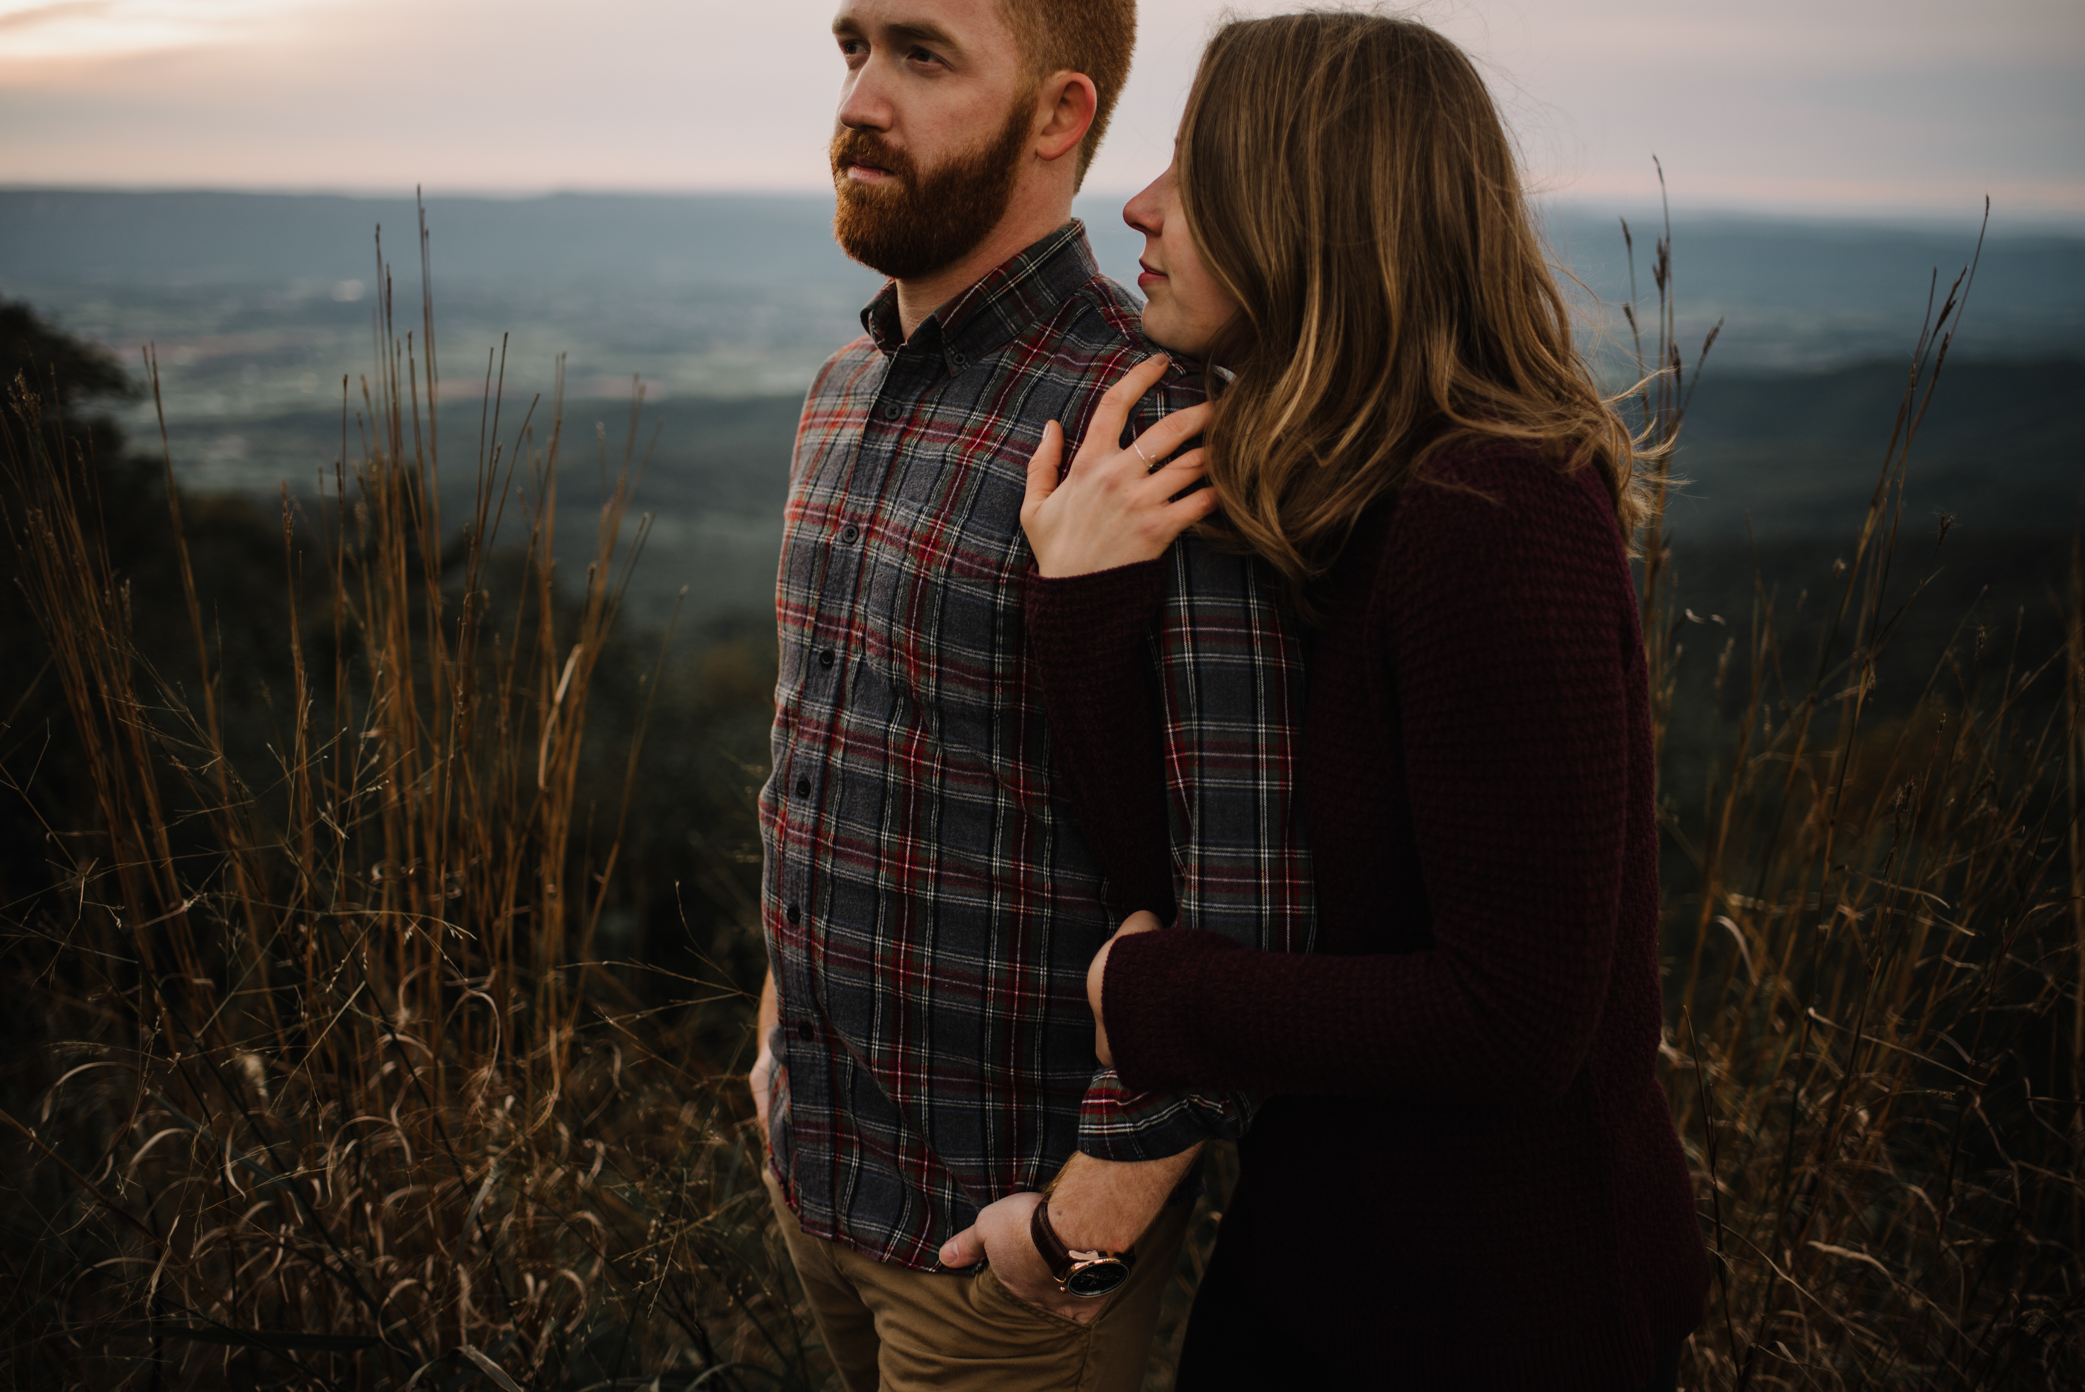 Molly and Zach Engagement Session - Fall Autumn Sunset Couple Adventure Session - Shenandoah National Park - Blue Ridge Parkway Skyline Drive - White Sails Creative_40.JPG